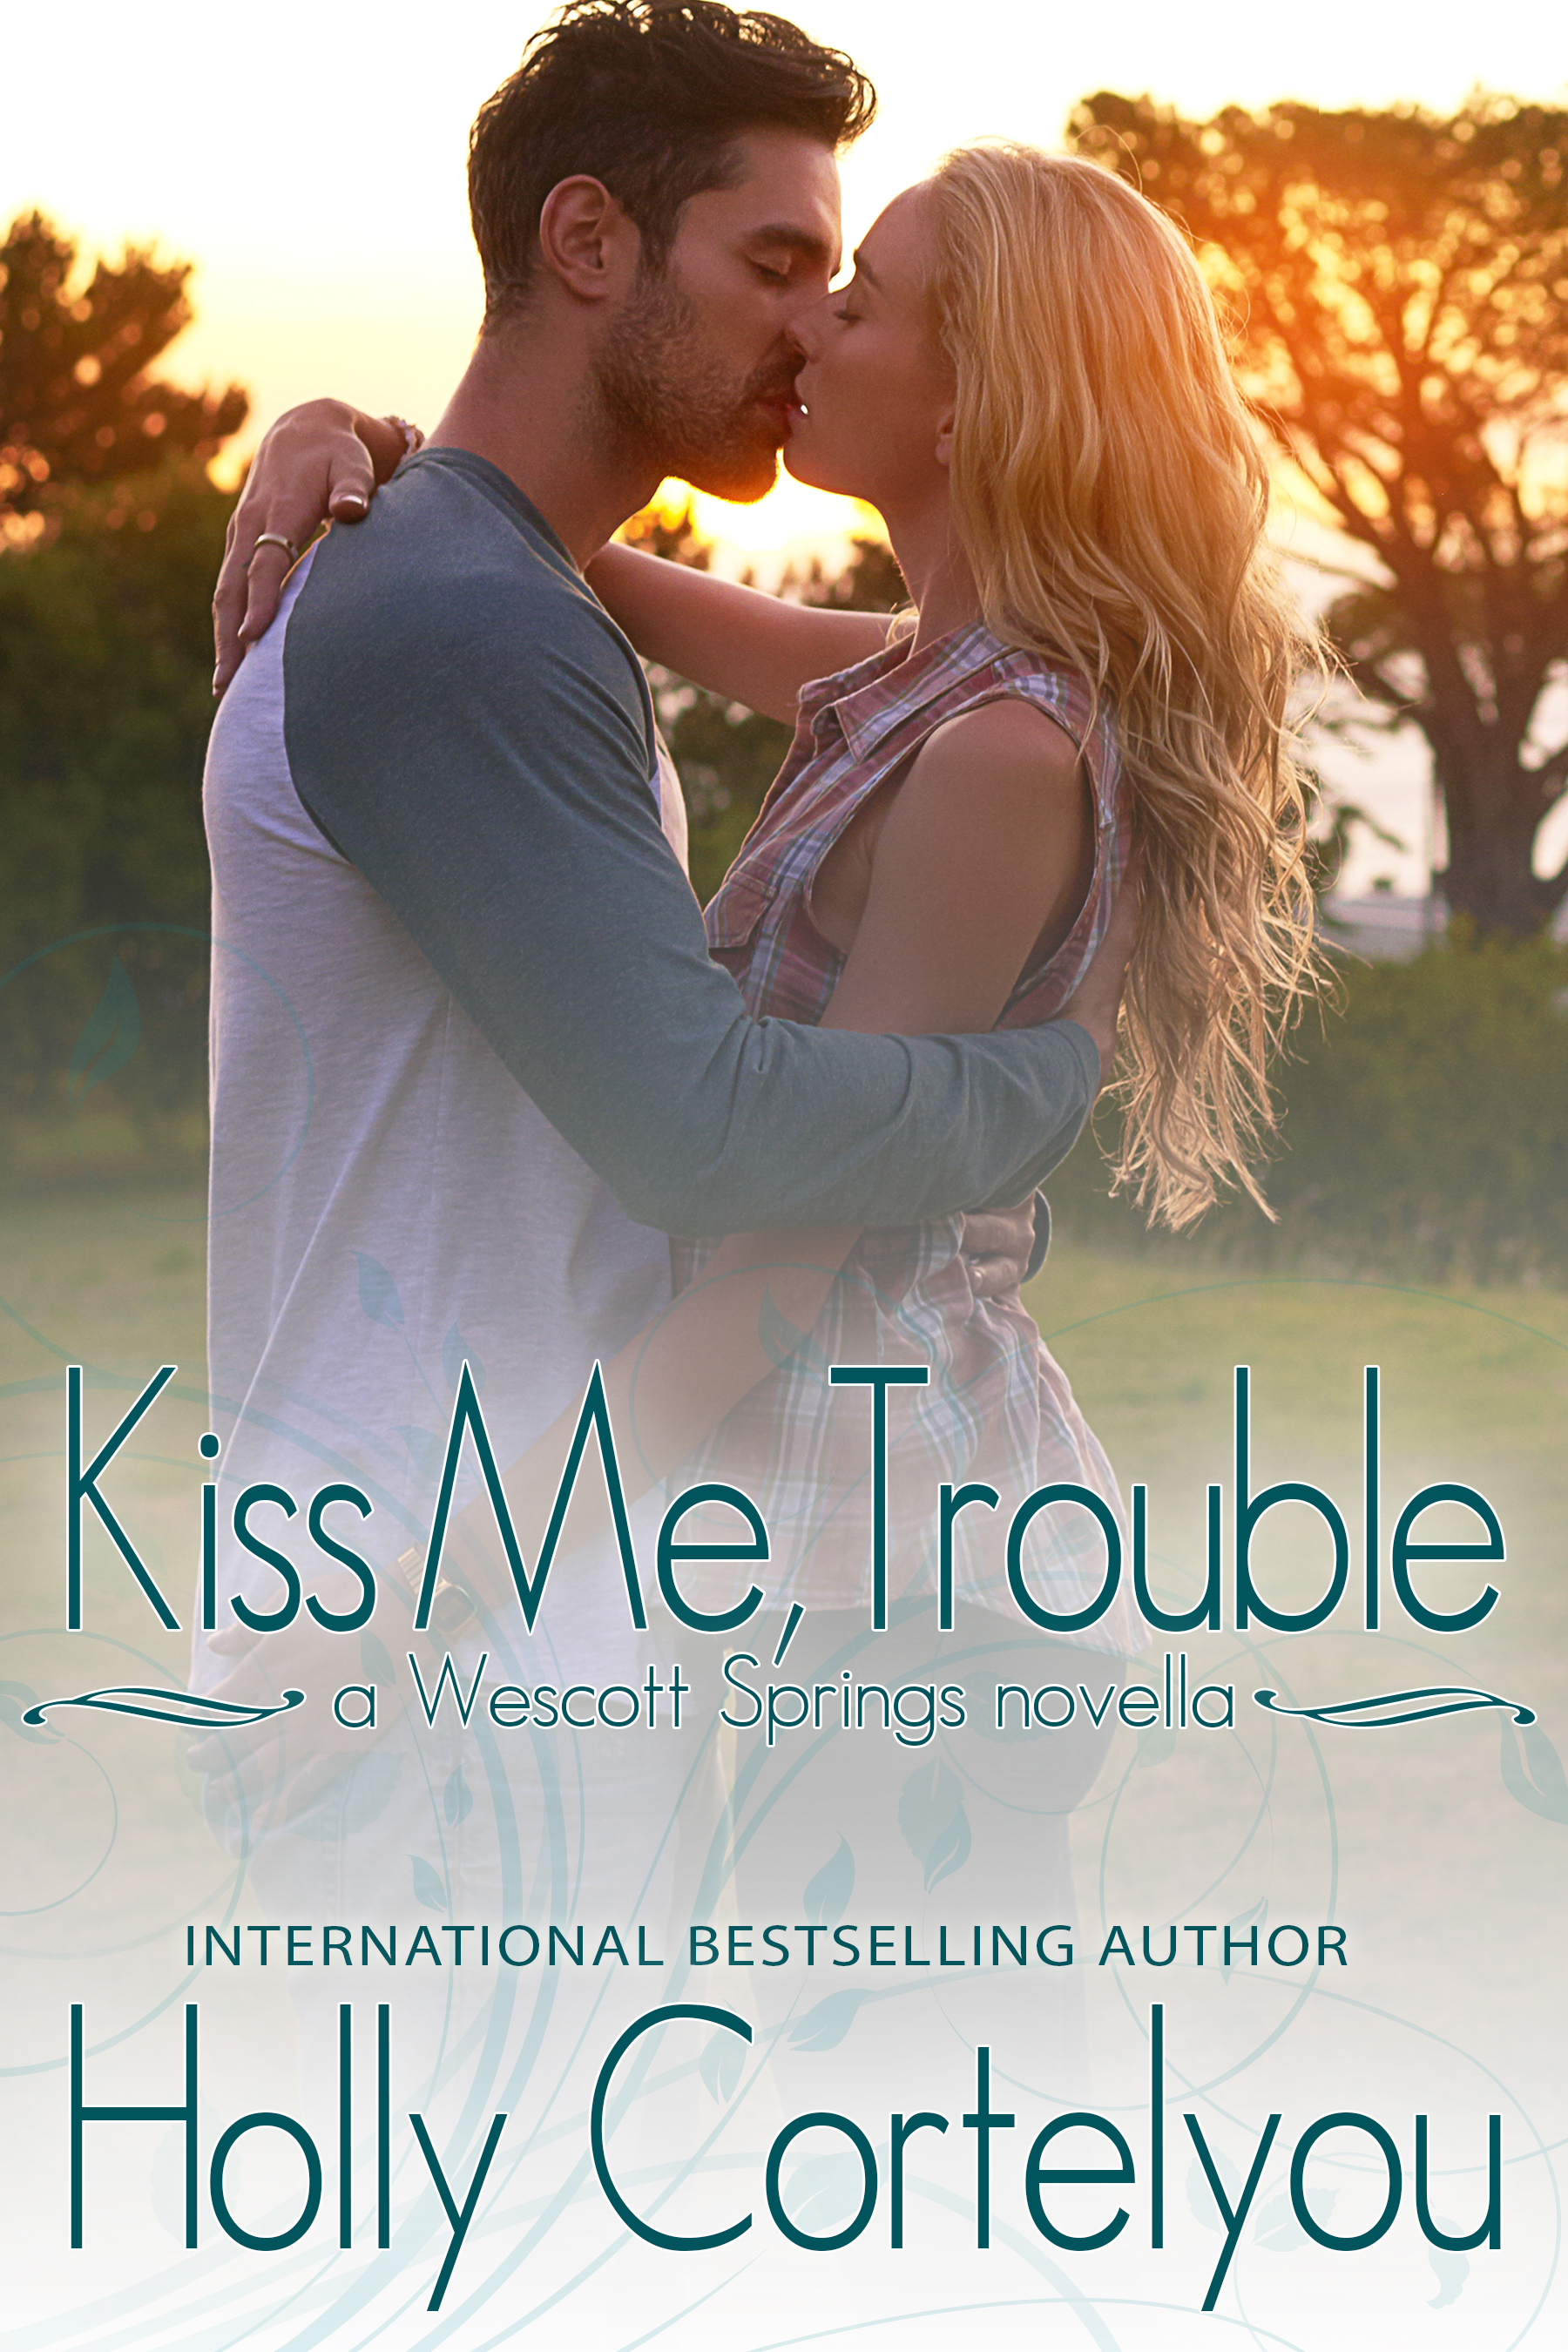 FREE: Kiss Me, Trouble by Holly Cortelyou